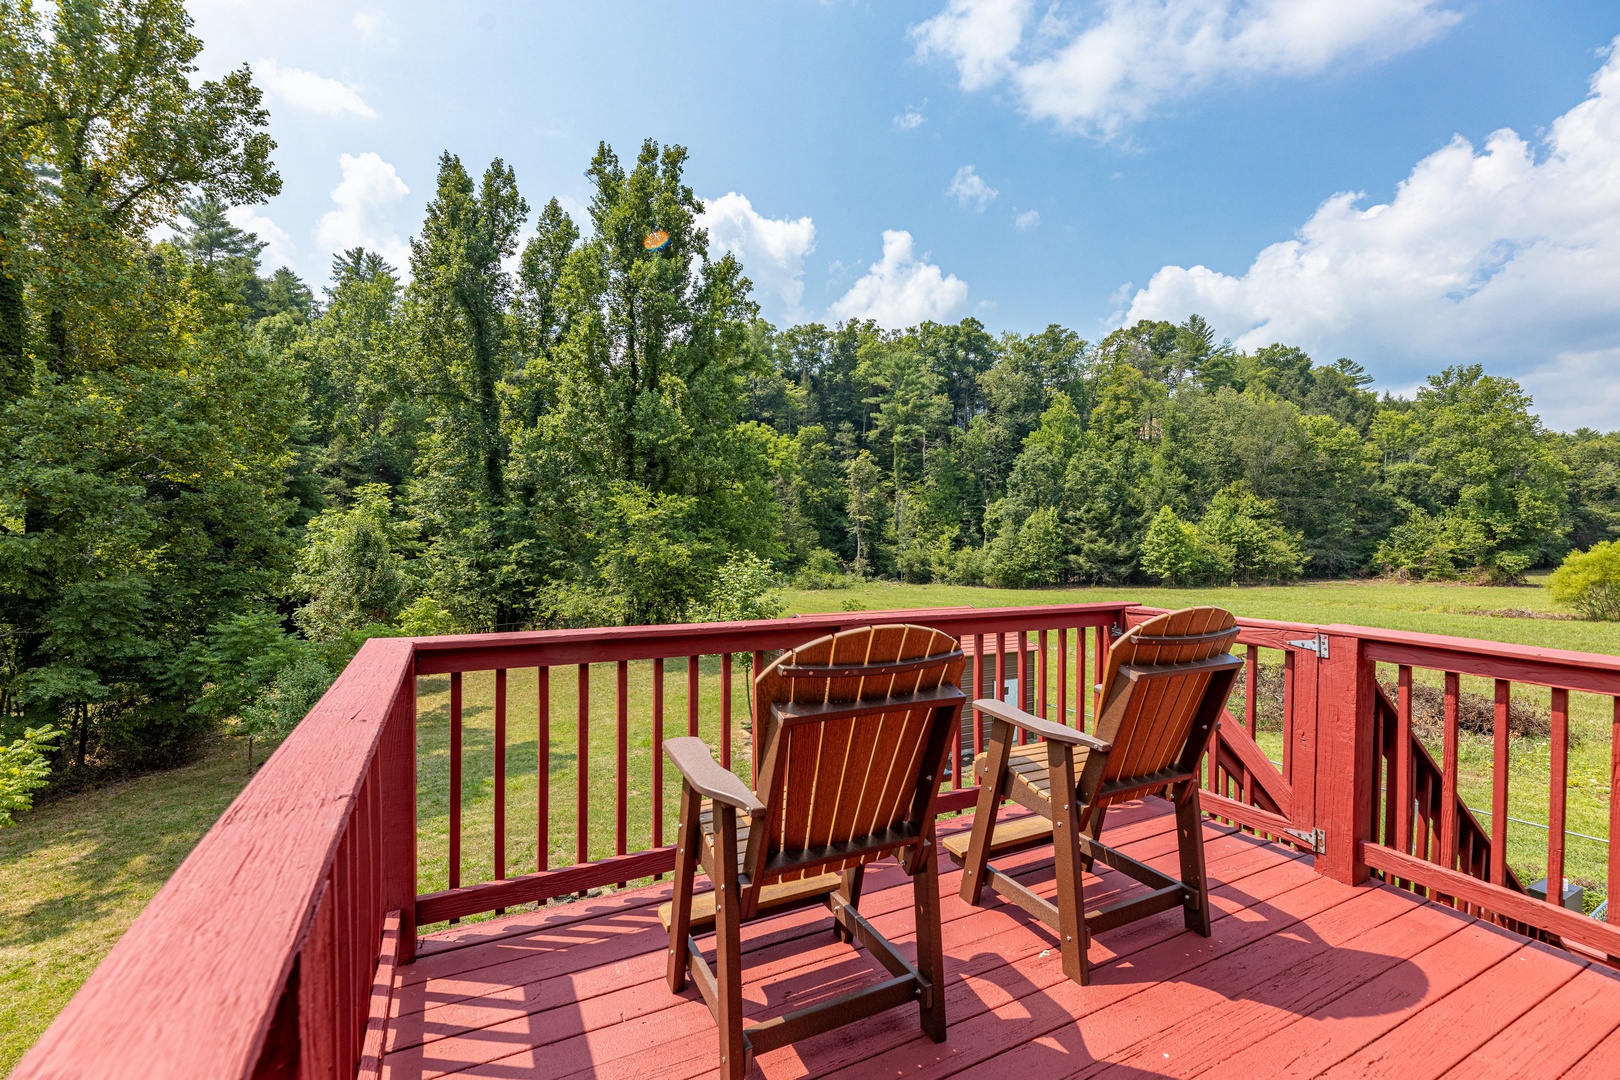 Deck seating for 2 at 1 Crazy Cub, a 4 bedroom cabin rental located in Pigeon Forge